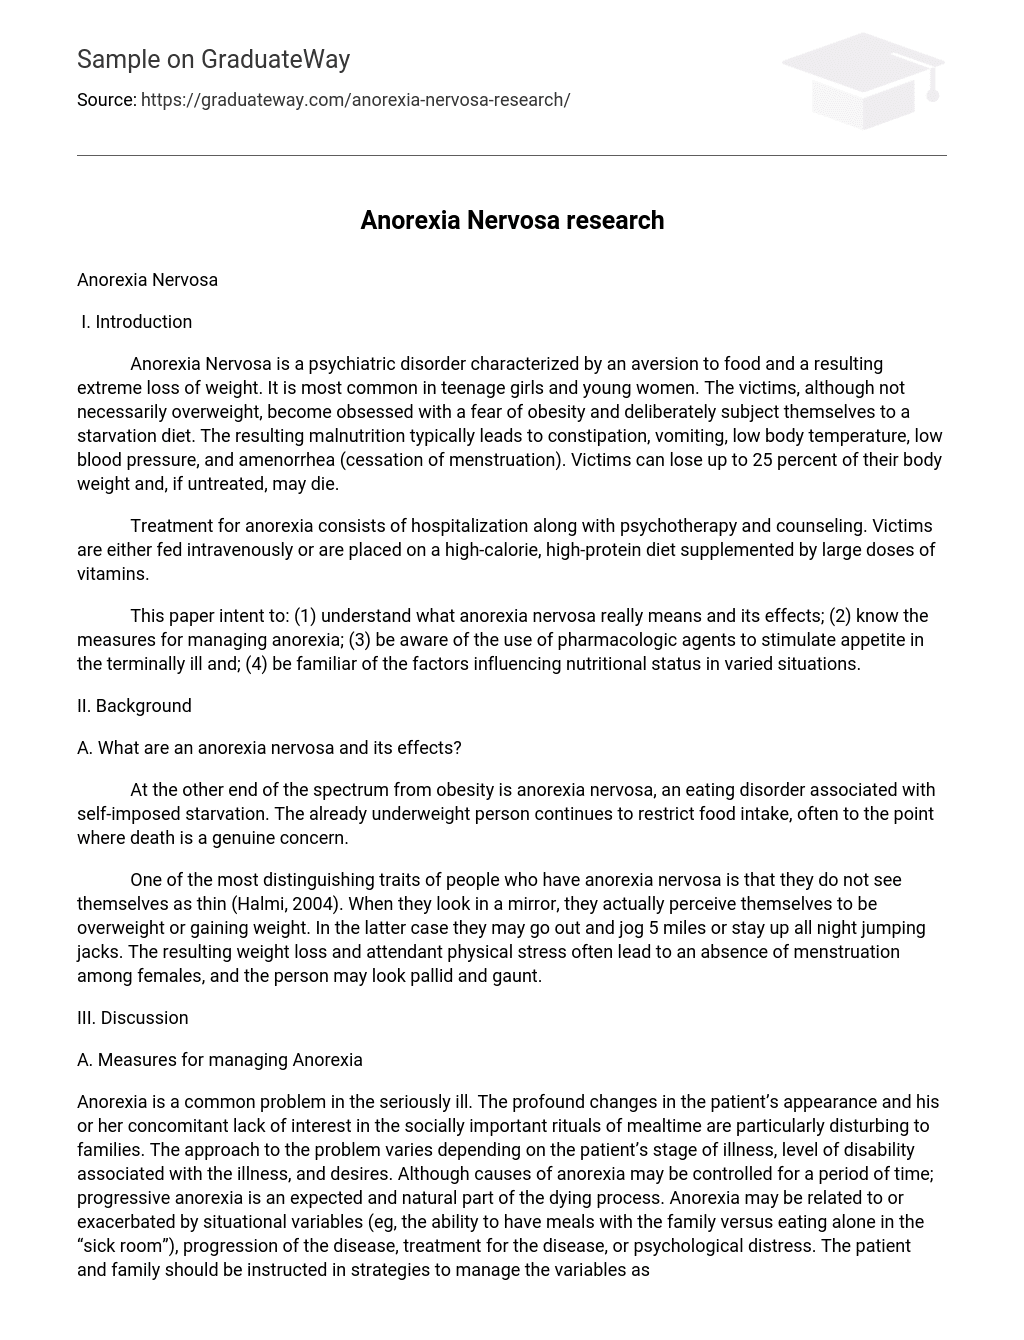 Anorexia Nervosa research